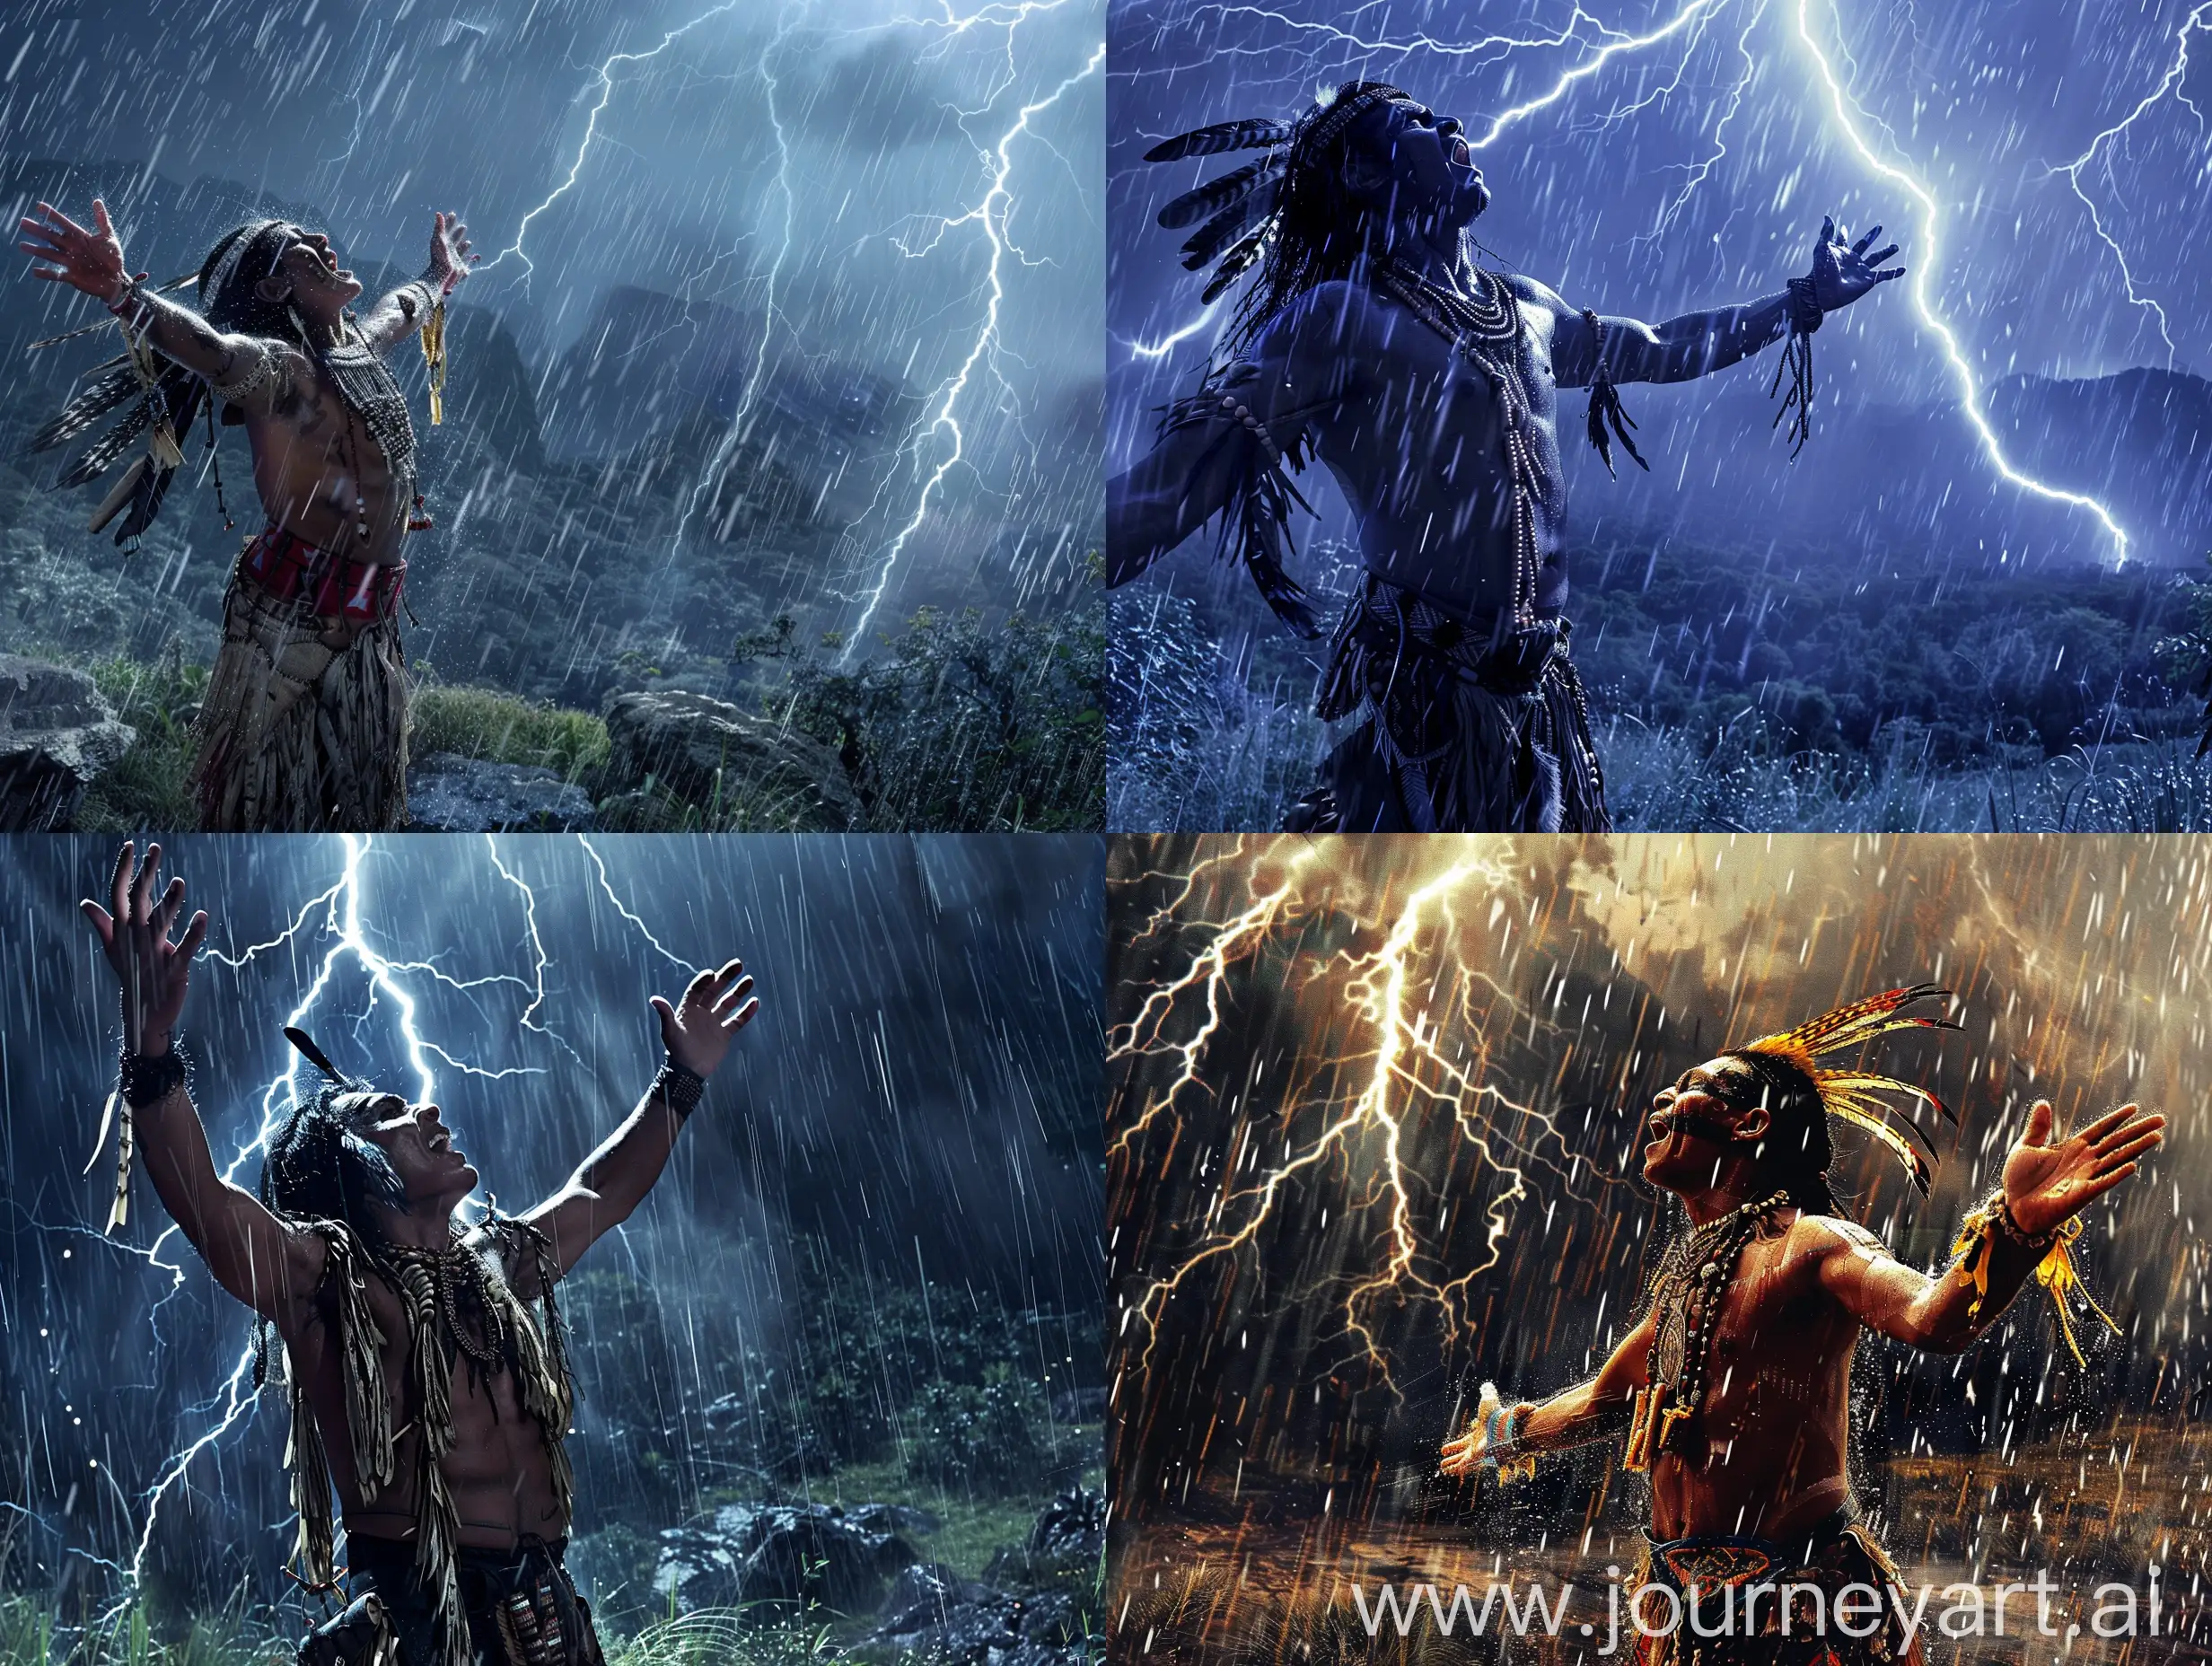 South-American-Native-Warrior-Shouting-in-Rainy-Valley-at-Night